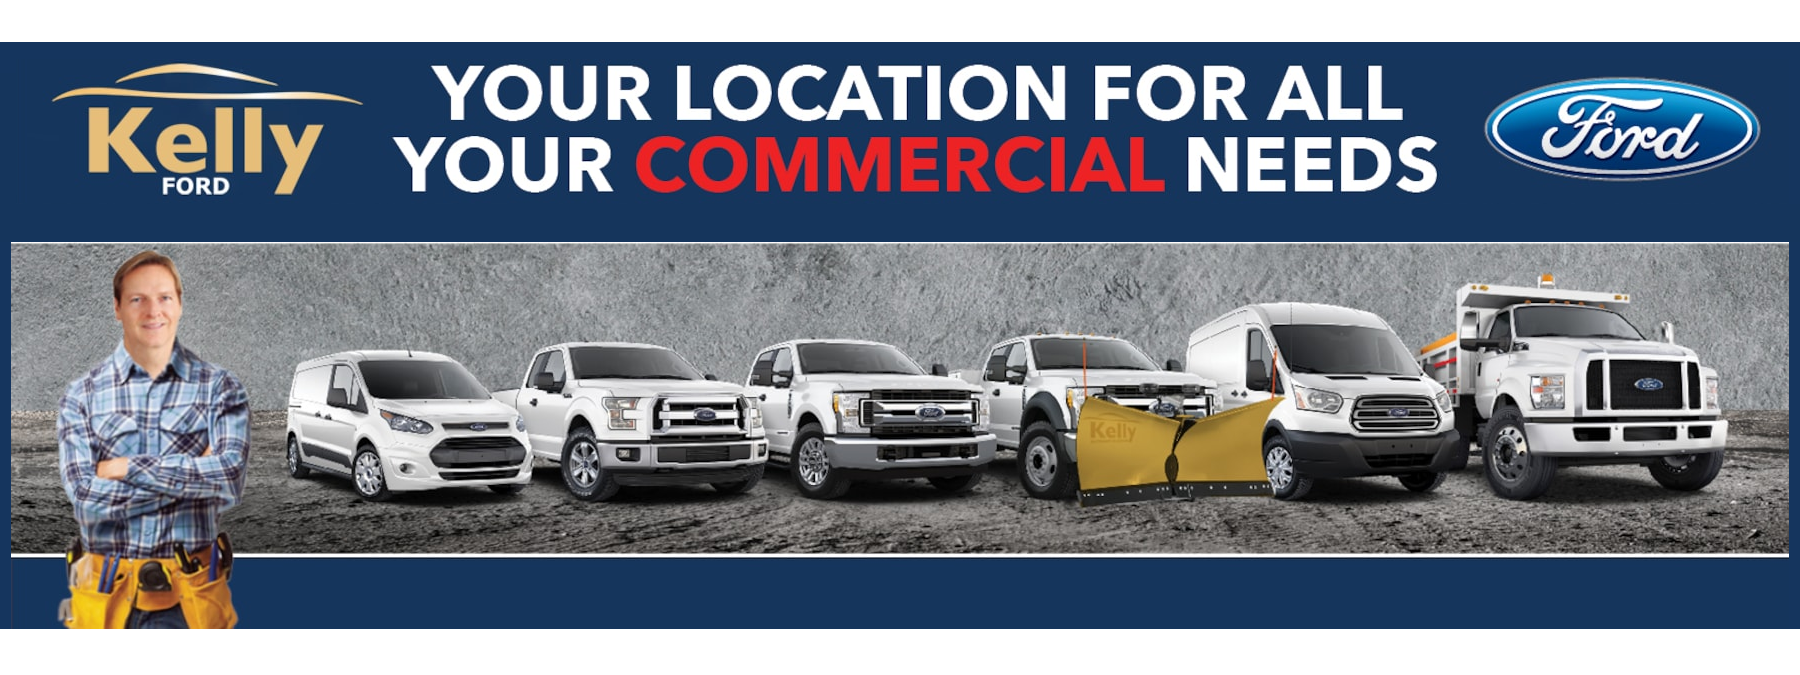 Ford Commercial Vehicles - Make Kelly Ford Your Home For All Your Commercial Vehicle Needs